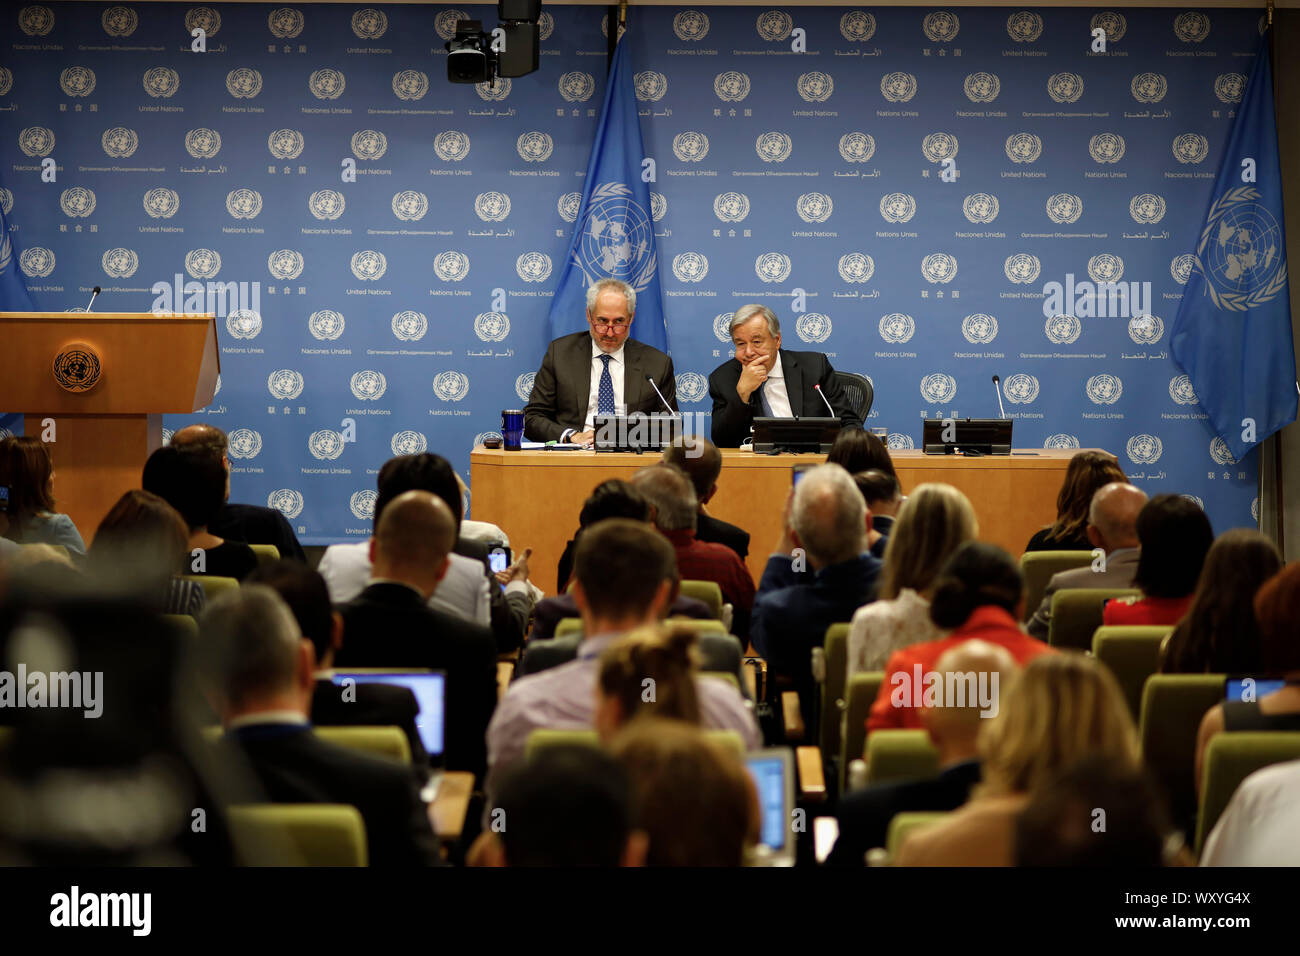 United Nations, UN headquarters in New York. 18th Sep, 2019. UN Secretary-General Antonio Guterres (R, rear) attends a press conference at the UN headquarters in New York, Sept. 18, 2019. The 74th session of the United Nations General Assembly (UNGA 74) will spotlight climate change in the coming days when leaders gather at the UN headquarters in New York to discuss issues of common concern, Antonio Guterres said Wednesday. Credit: Li Muzi/Xinhua/Alamy Live News Stock Photo